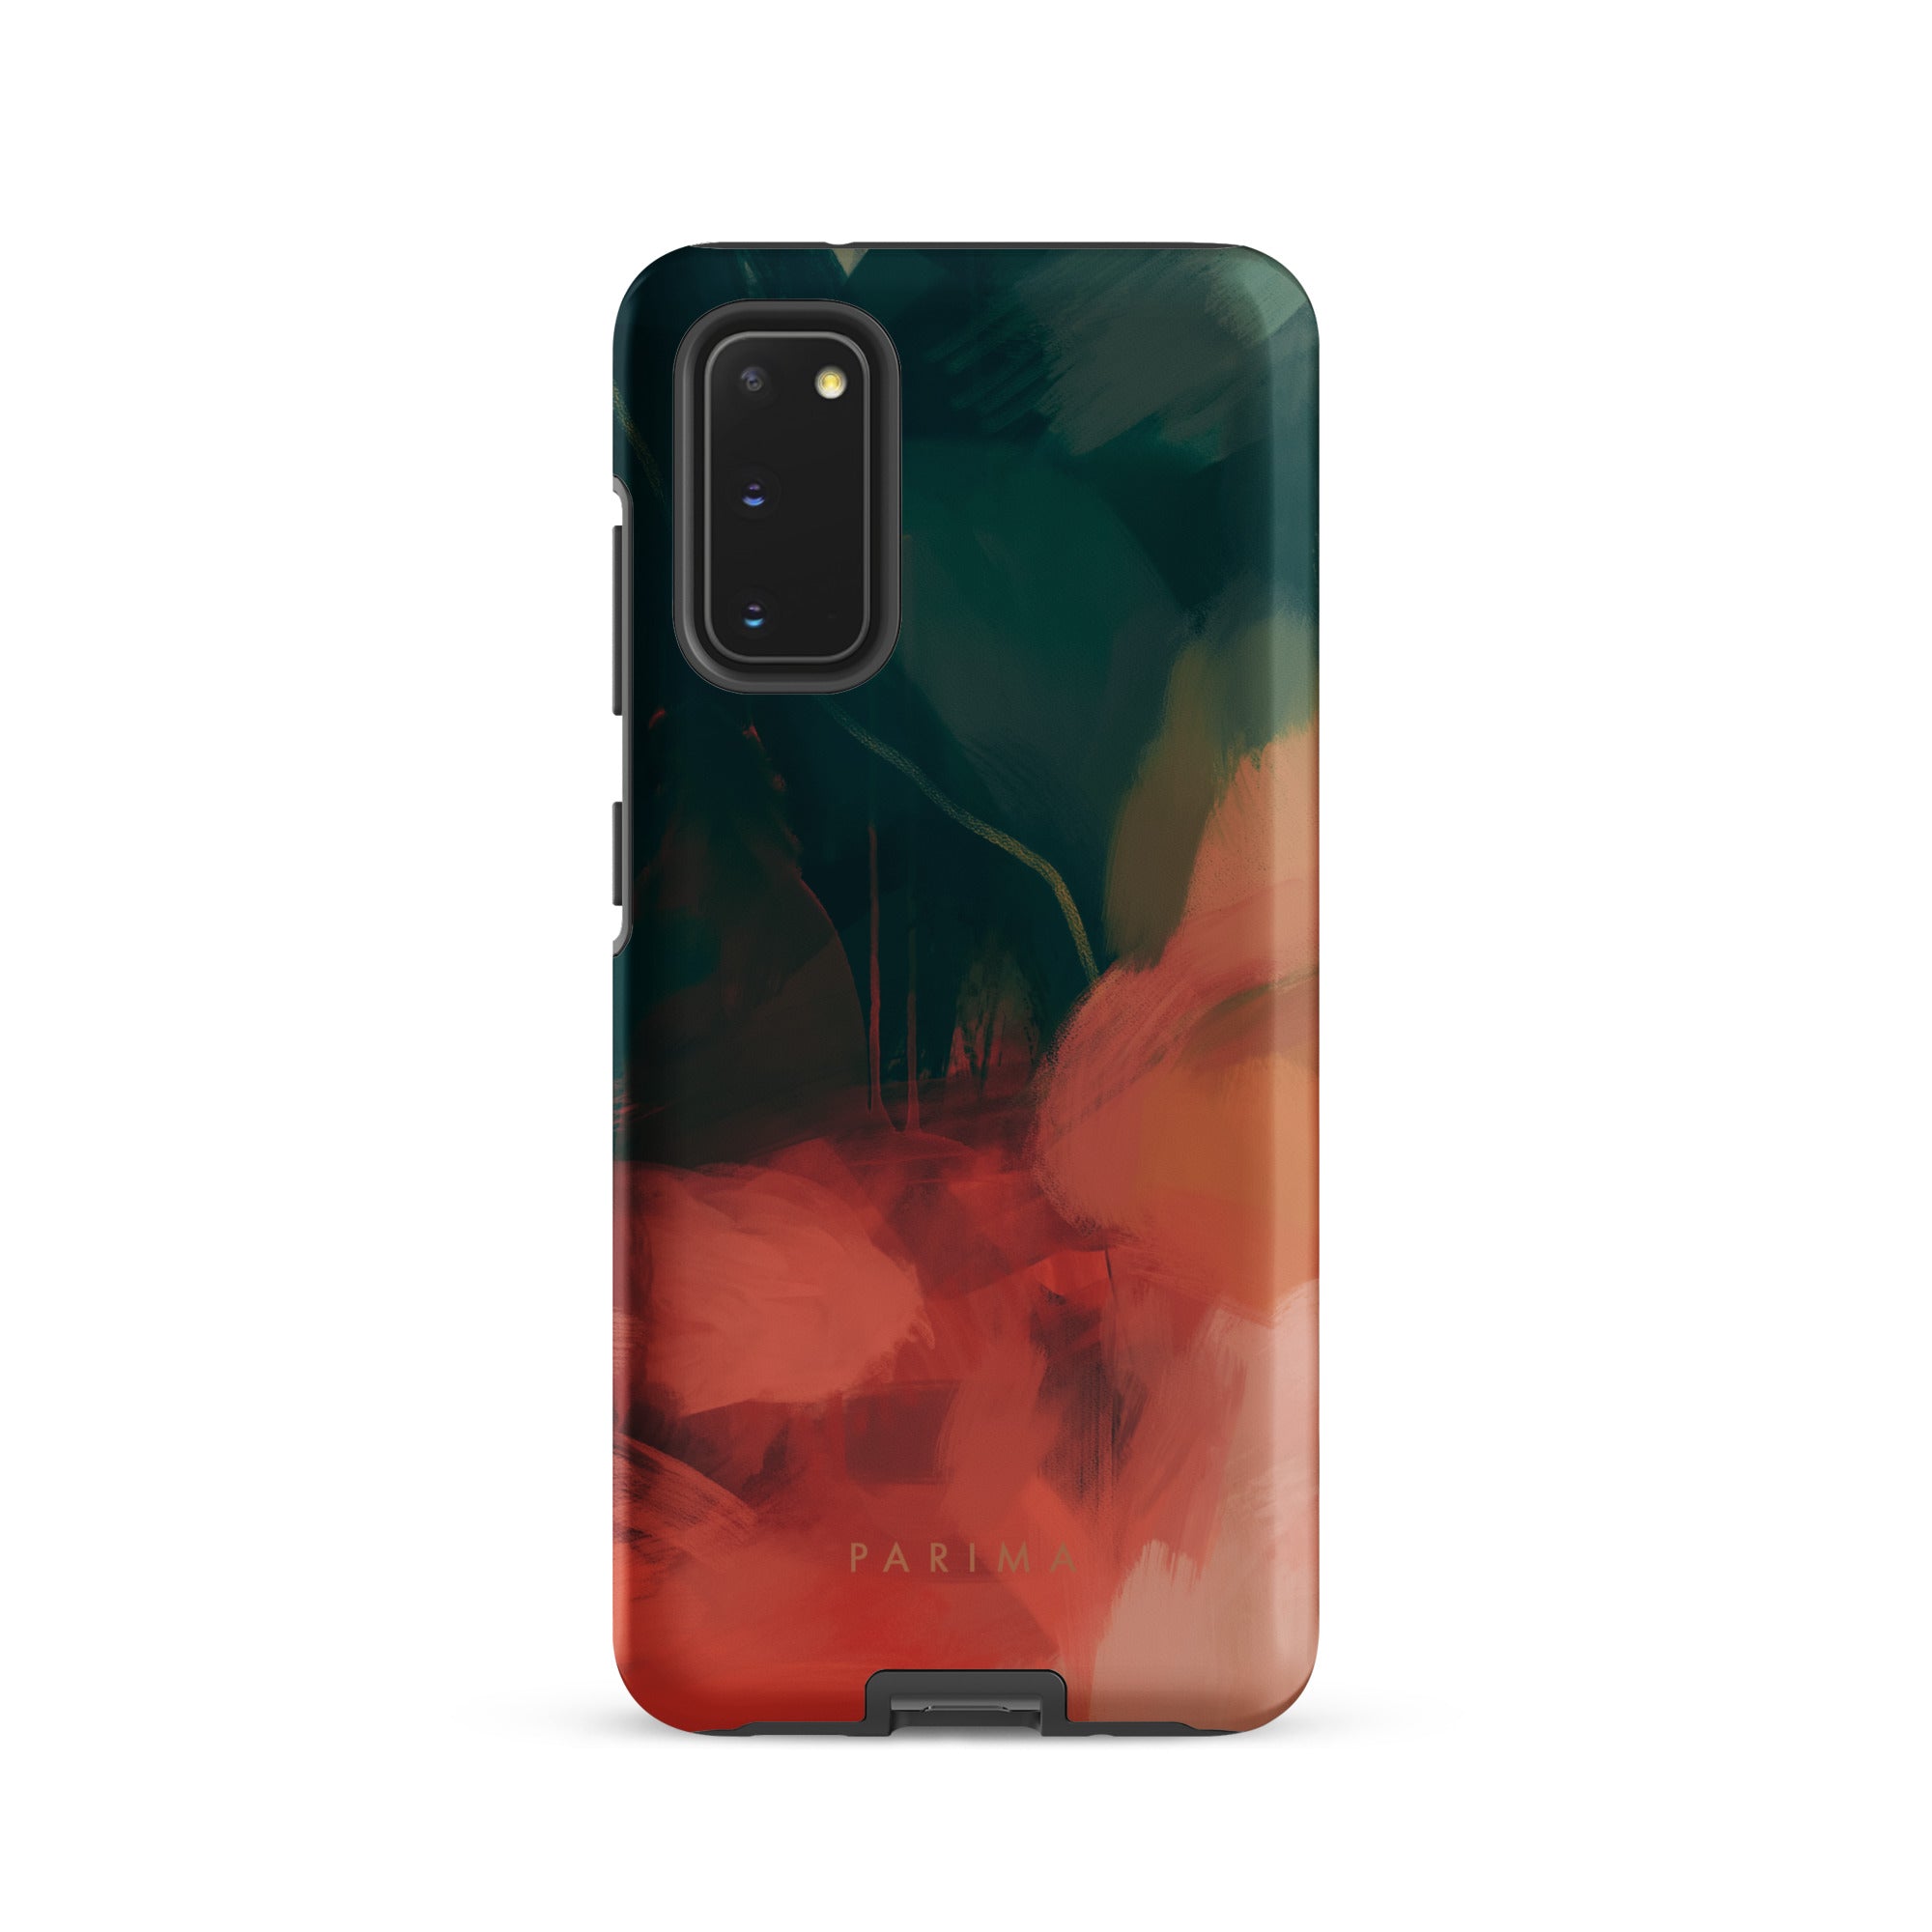 Eventide, green and red abstract art on Samsung Galaxy S20 tough case by Parima Studio